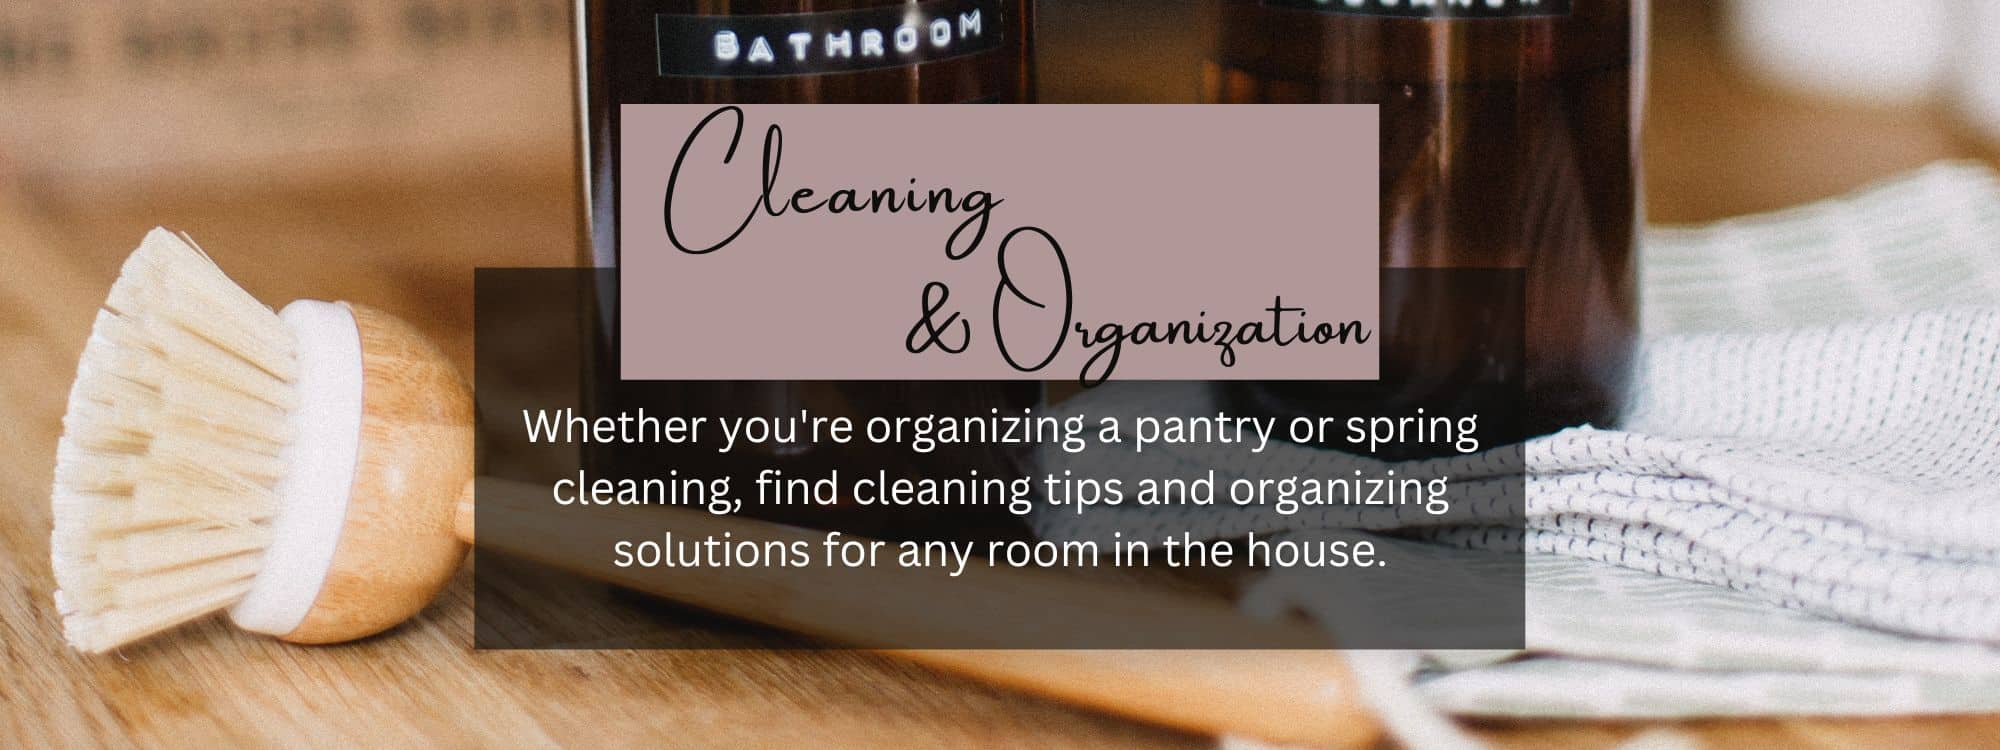 house cleaning tips and tricks to keep your home clean tidy decluttered helful hacks homemaking schedules professional organizing kitchen bathroom bedroom living room inspiration motivation guests declutter best DIY ideas simple life kids solutions more